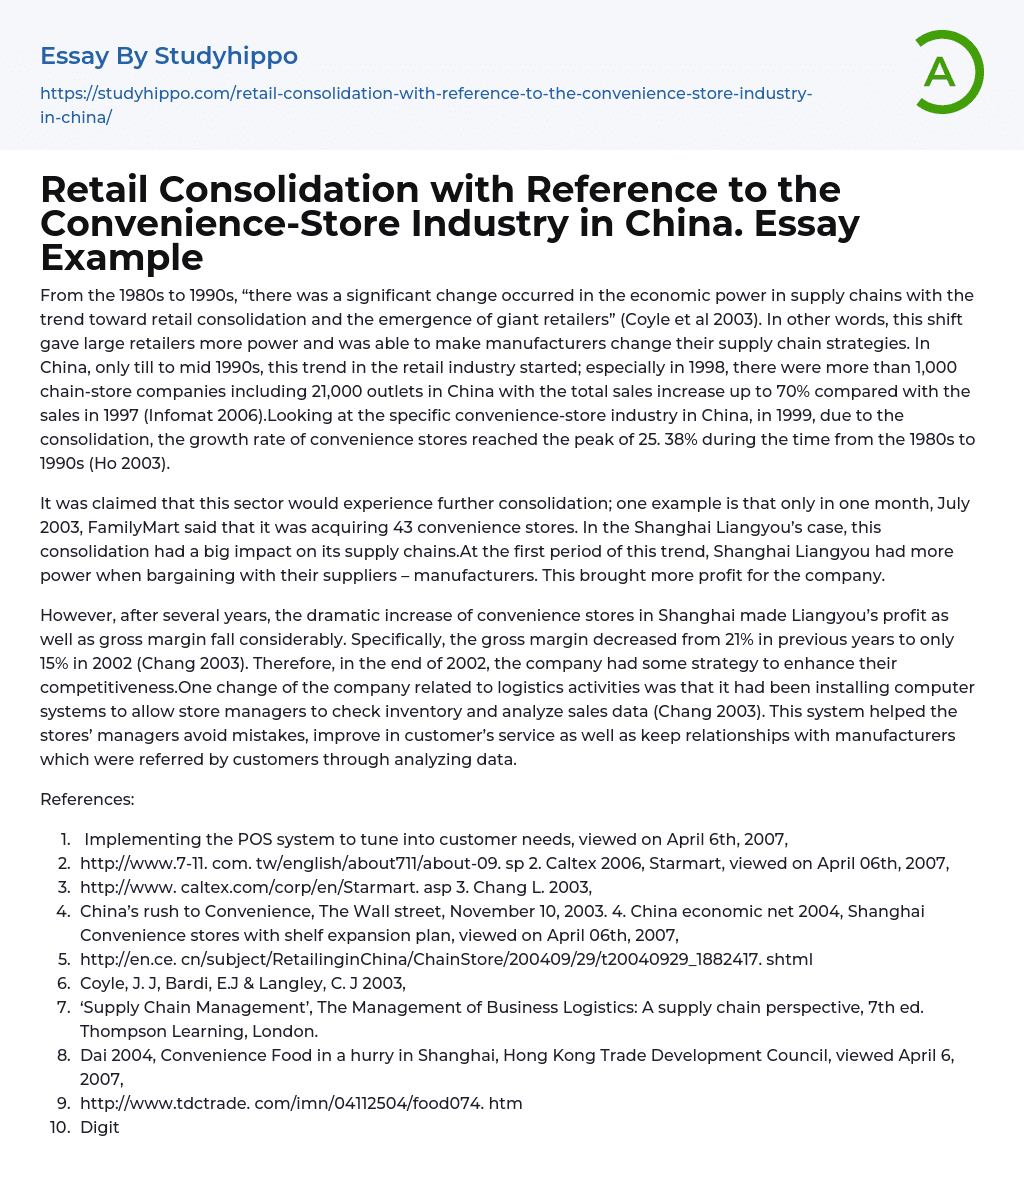 Retail Consolidation with Reference to the Convenience-Store Industry in China. Essay Example